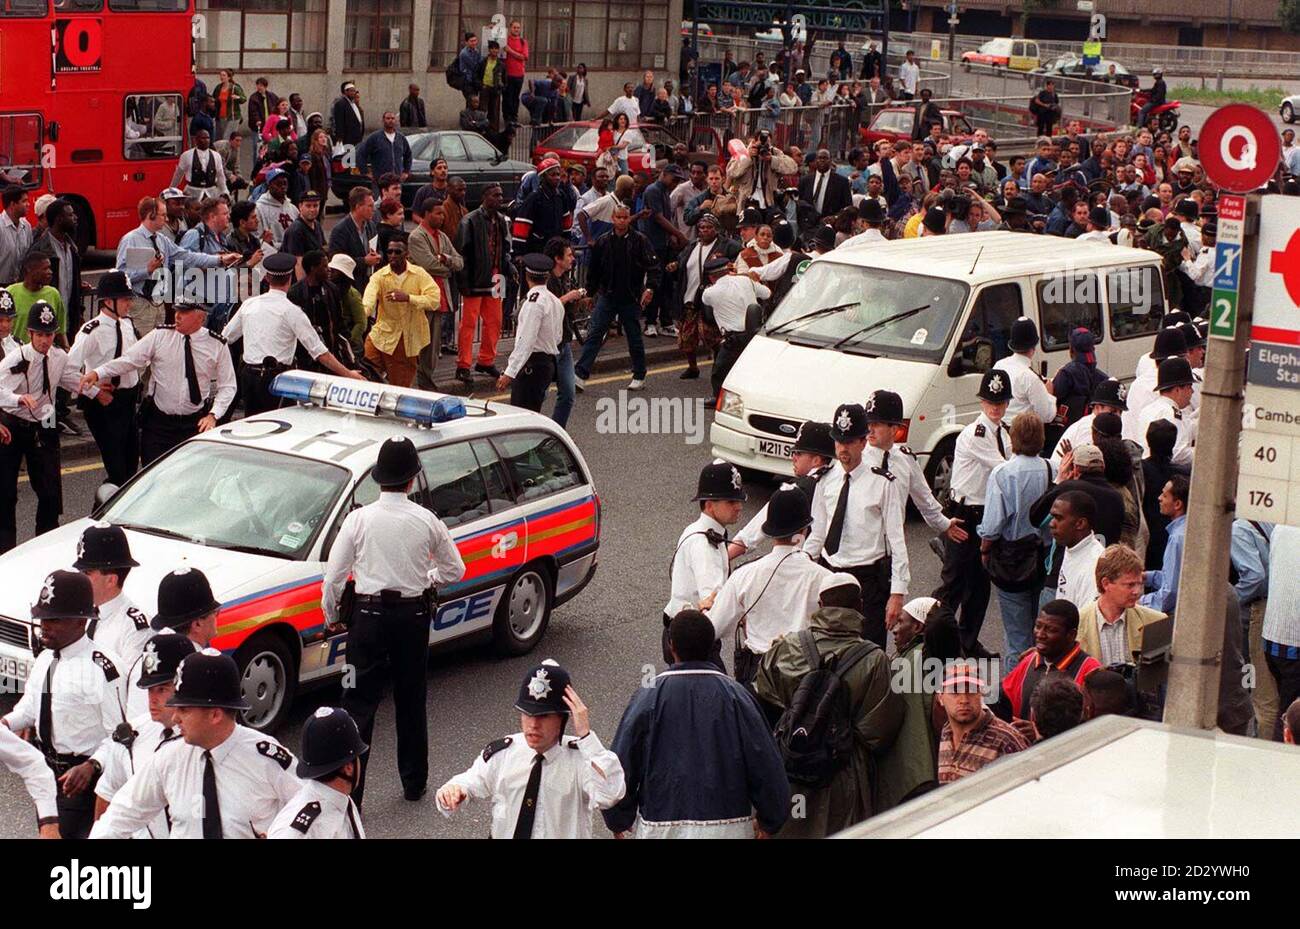 A police car leads a van transporting the five murder suspects away from the crowds of angry demonstrators after the two days of questioning in the Stephen Lawrence Murder Inquiry came to an end. Stock Photo